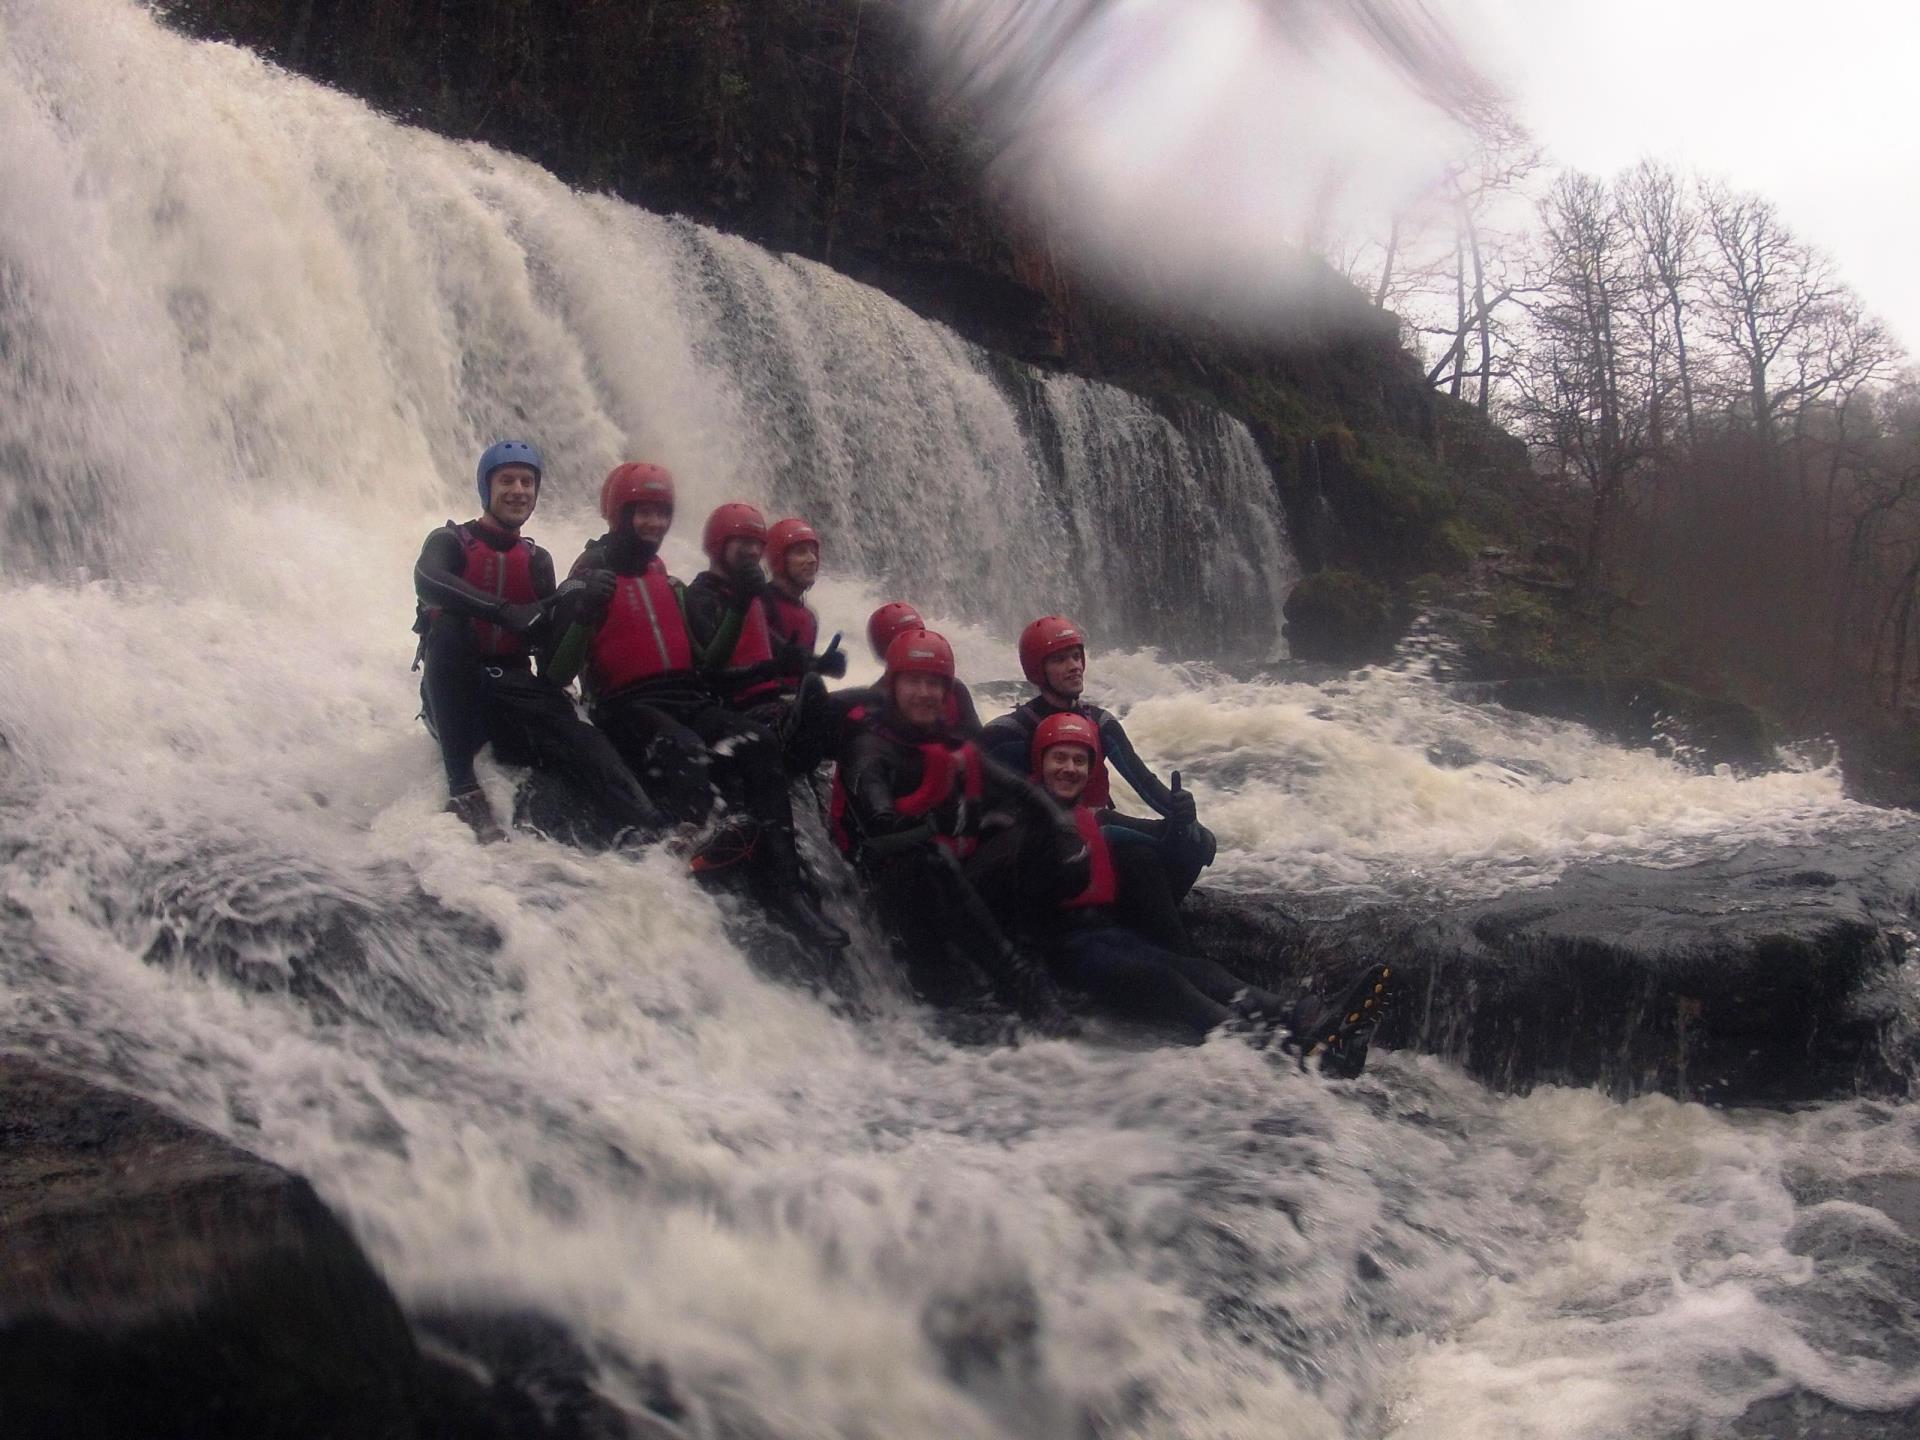 Canyoning in the Brecon Beacons National Park, Wal